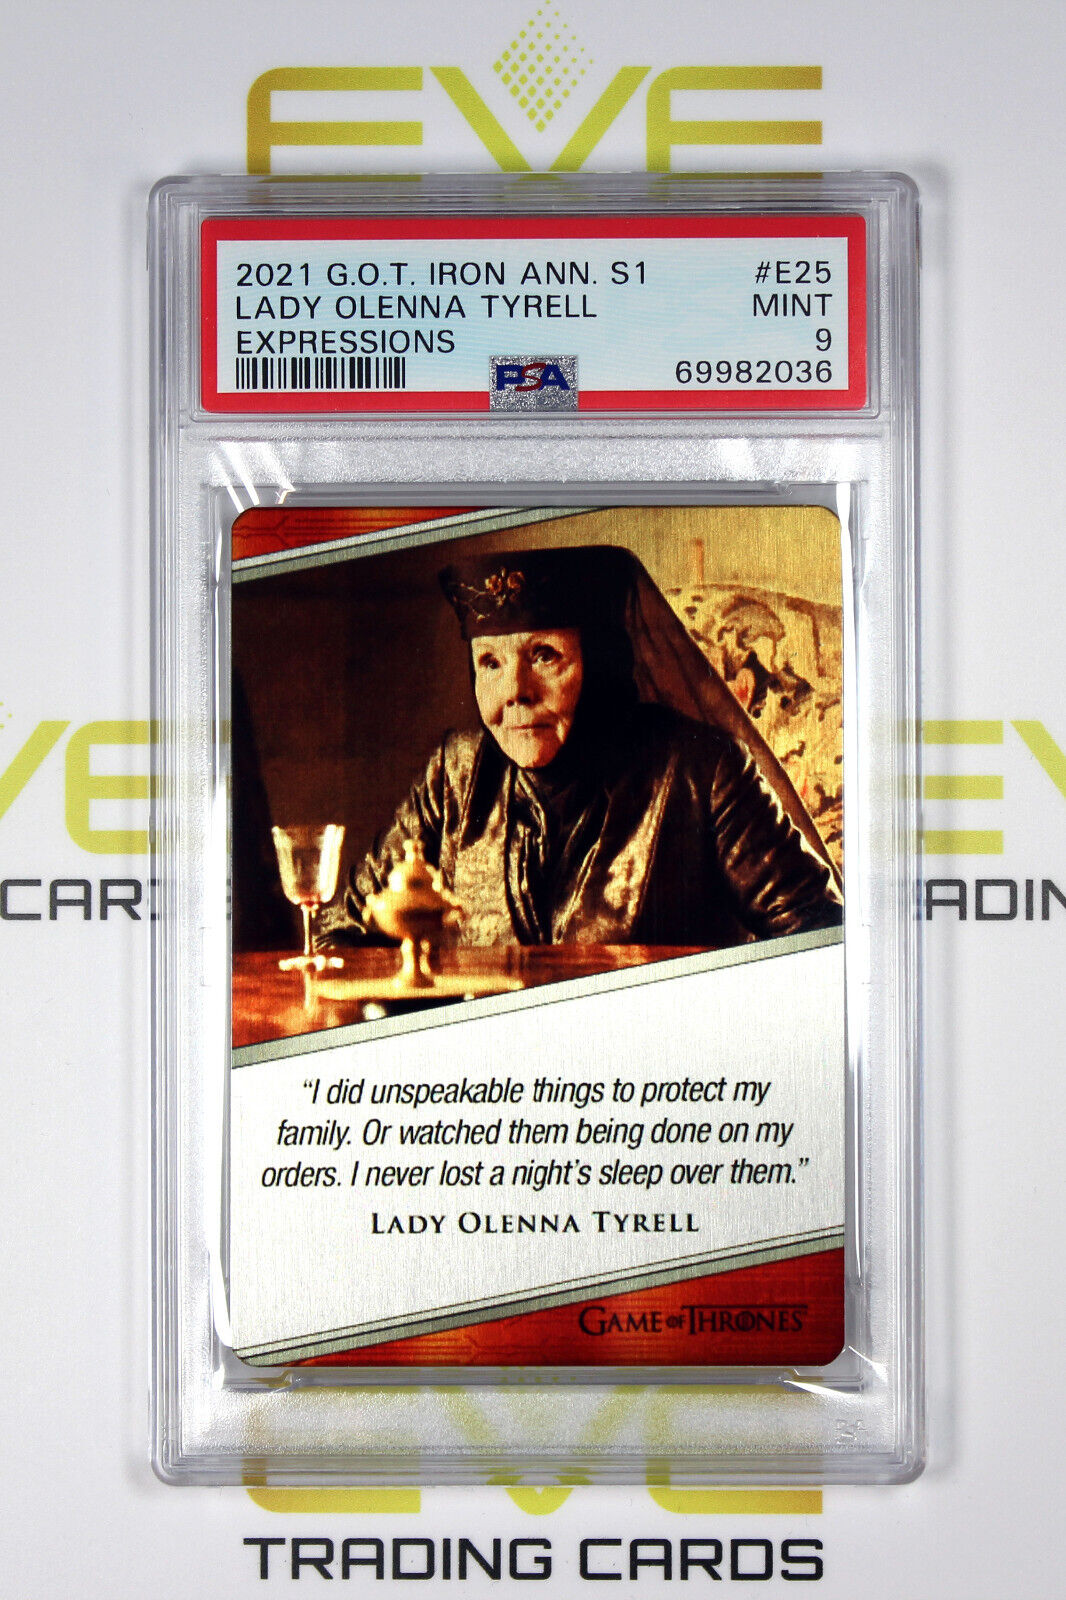 Graded Game of Thrones Card - #E25 2021 Lady Olenna Tyrell - Expressions - PSA 9